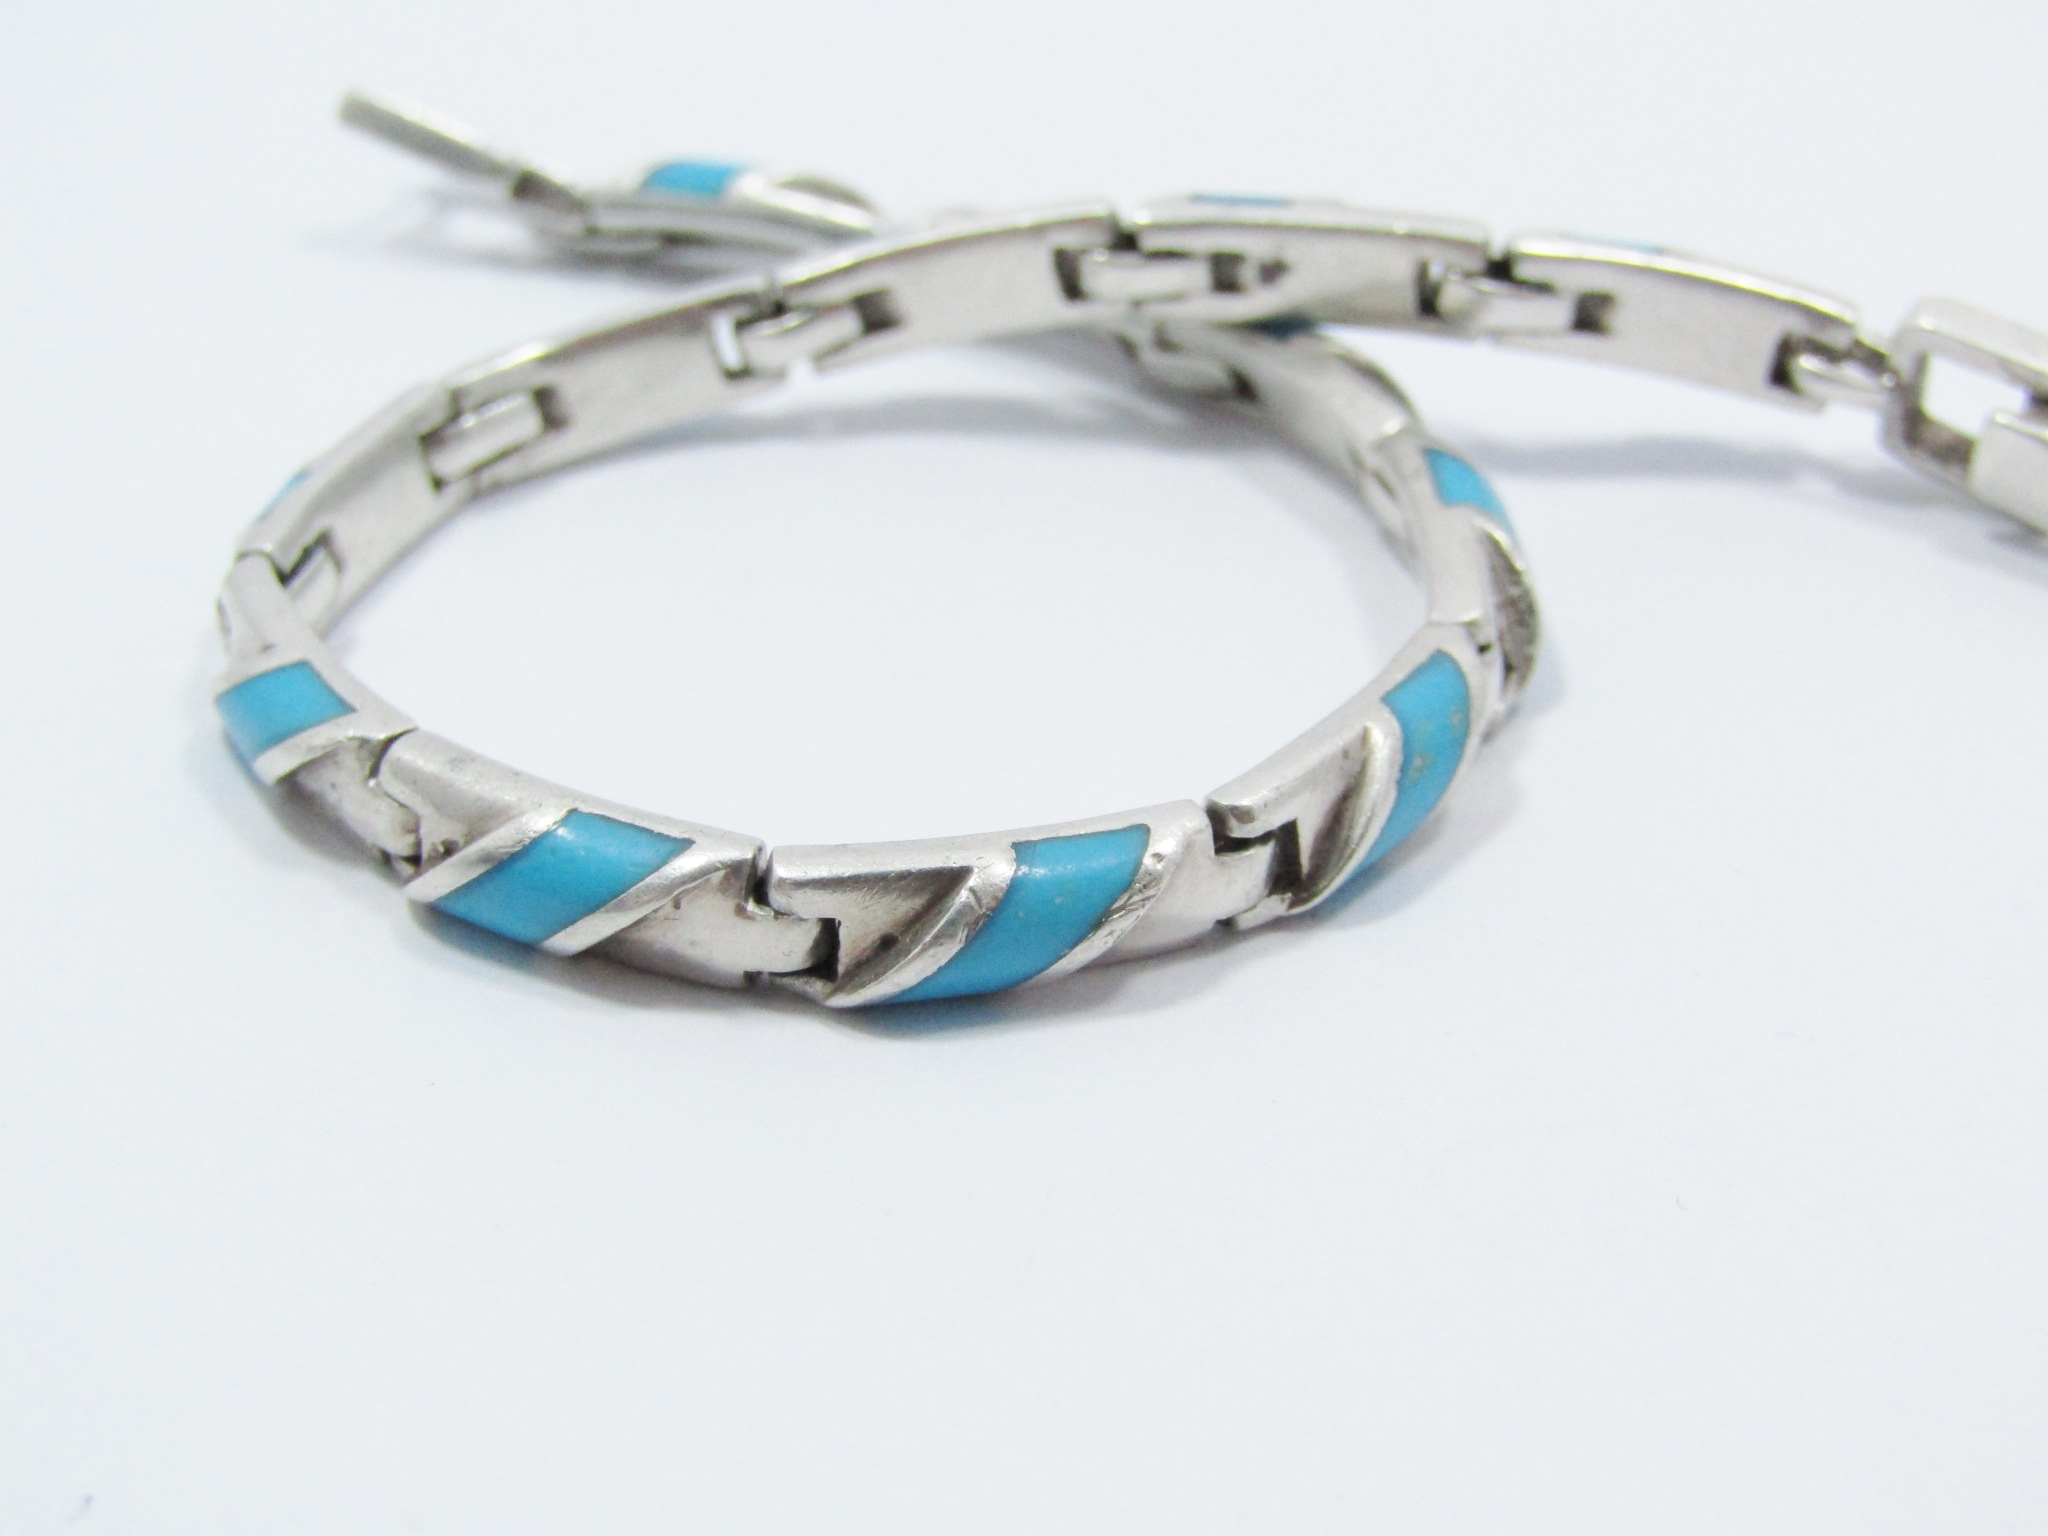 A Gorgeous Paneled Bracelet With a Turquois Inlay in Sterling Silver.